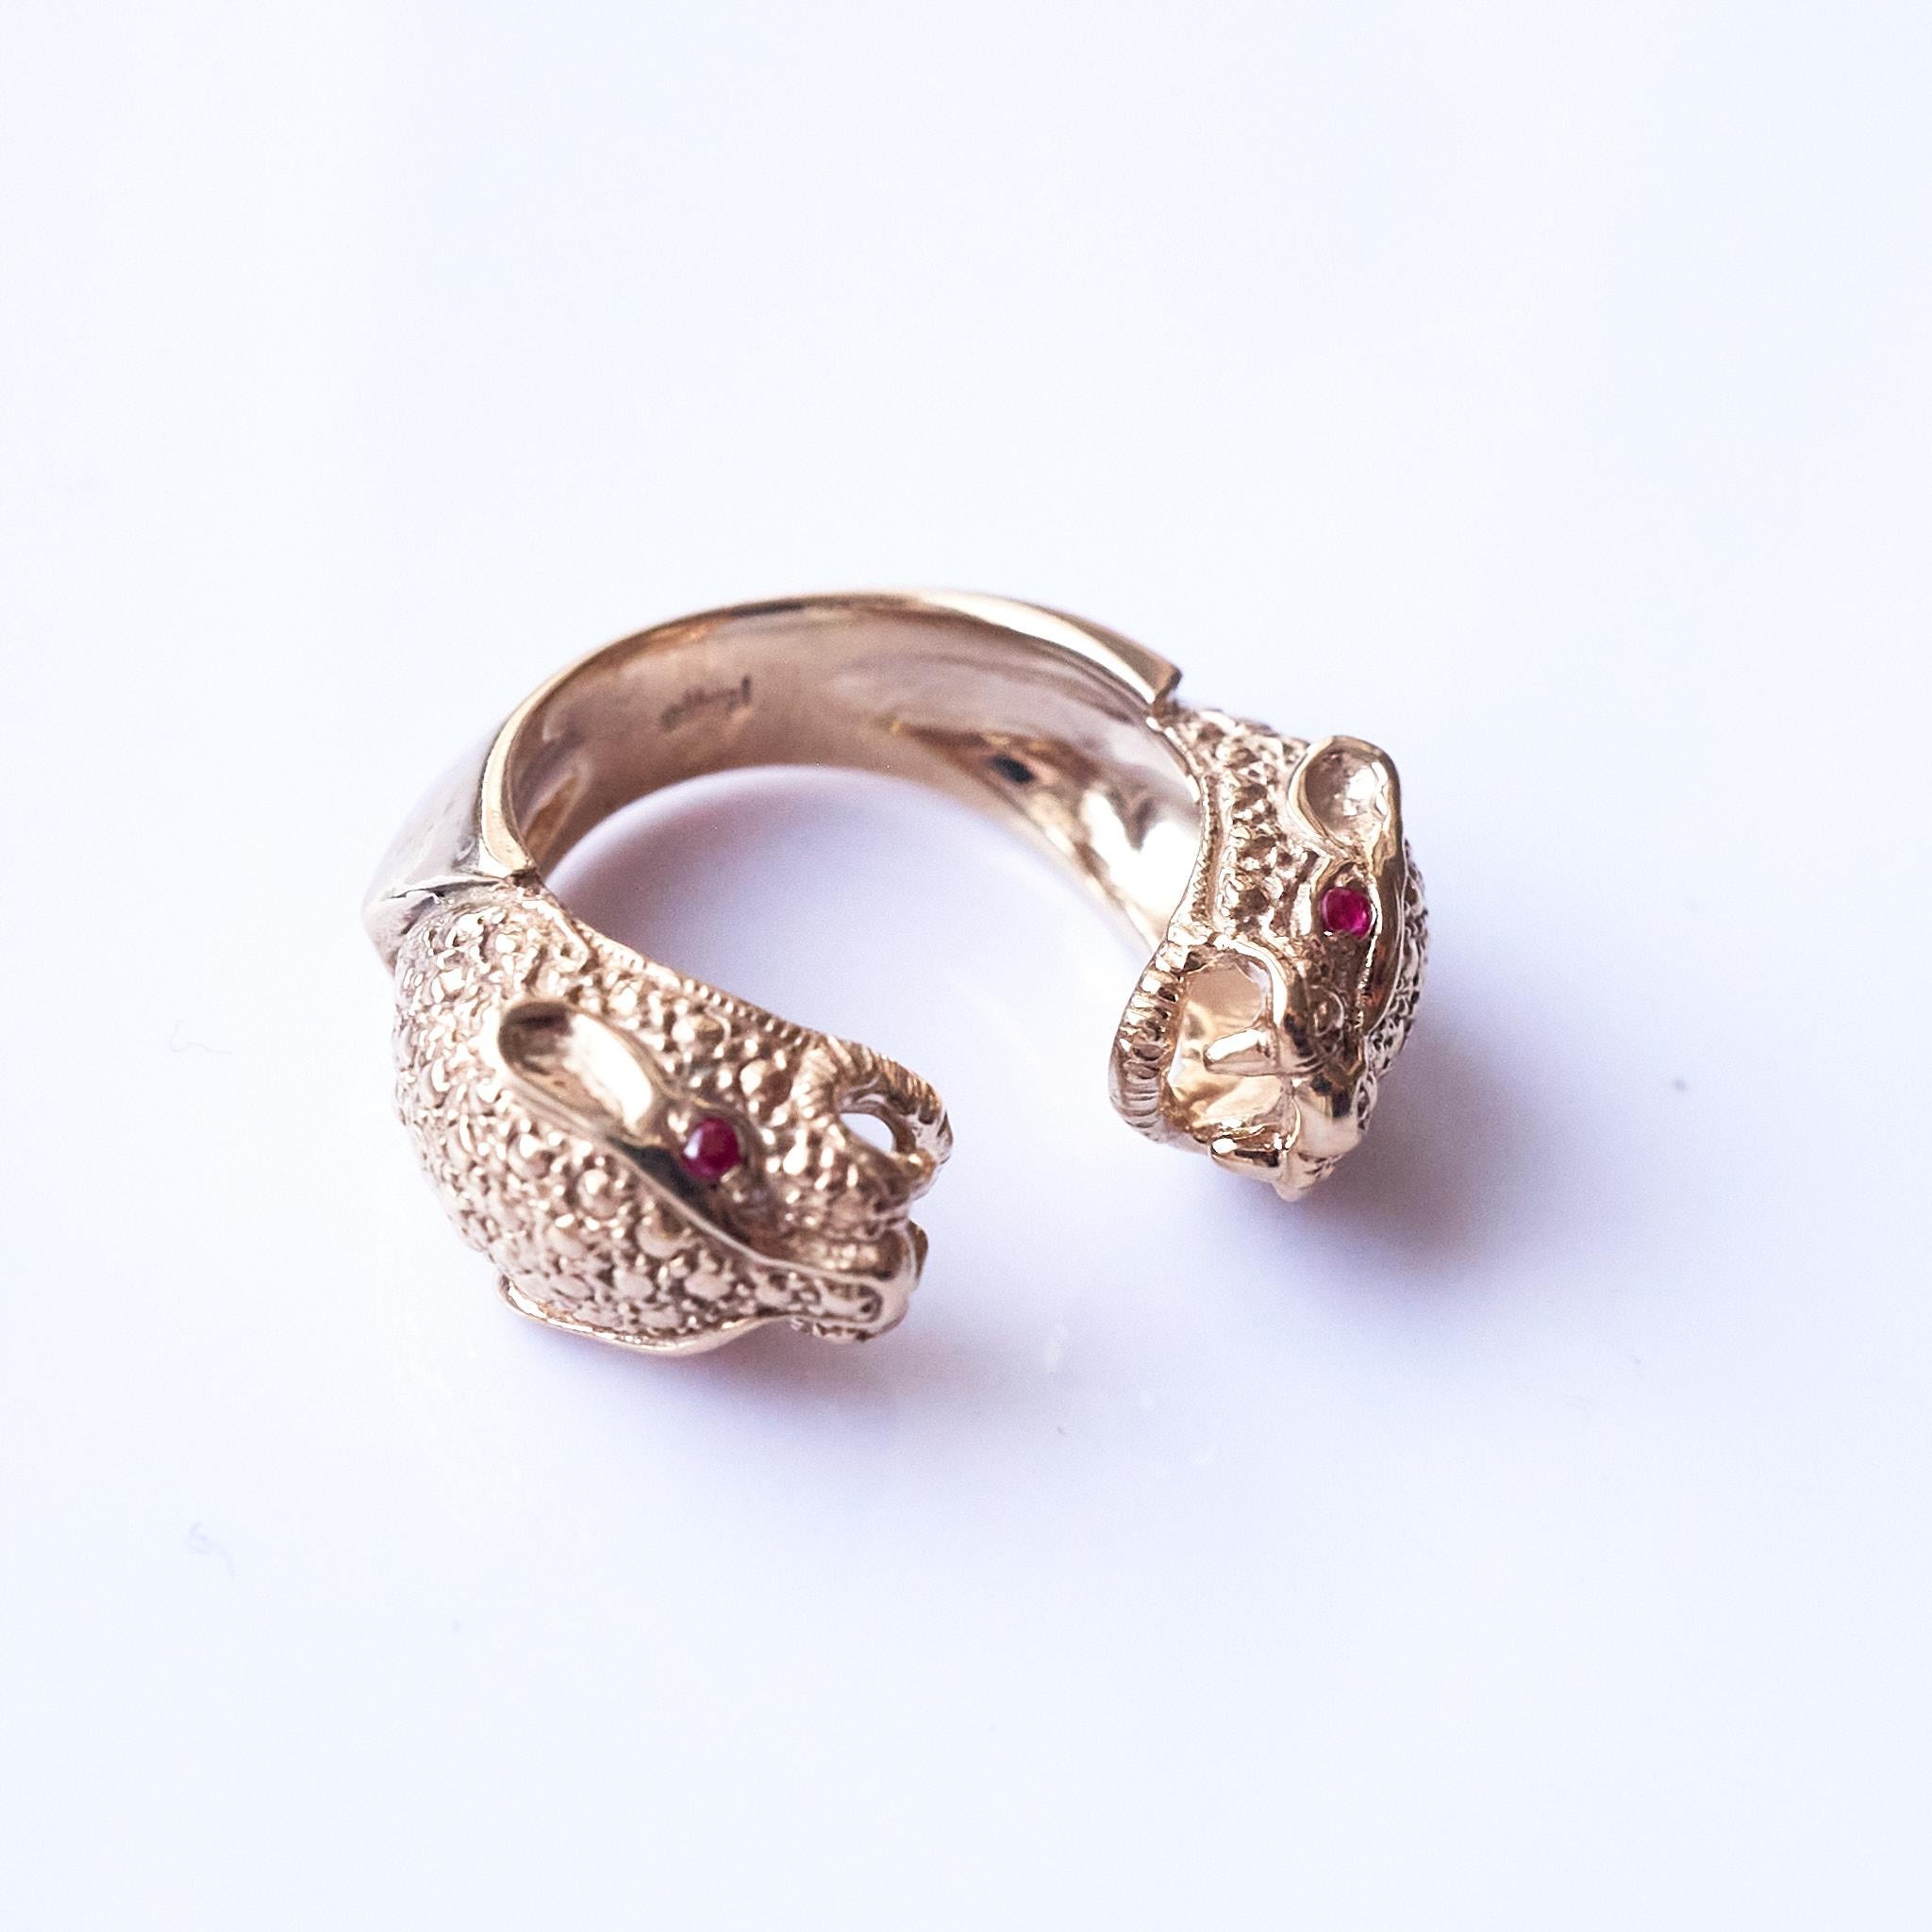 Ruby Jaguar Ring Bronze Animal Jewelry Cocktail Ring J Dauphin

Made in Los Angeles

This Ring is tiny adjustable on the finger between sizes 6-8
Can be made in Gold or Silver

Available for immediate delivery, 